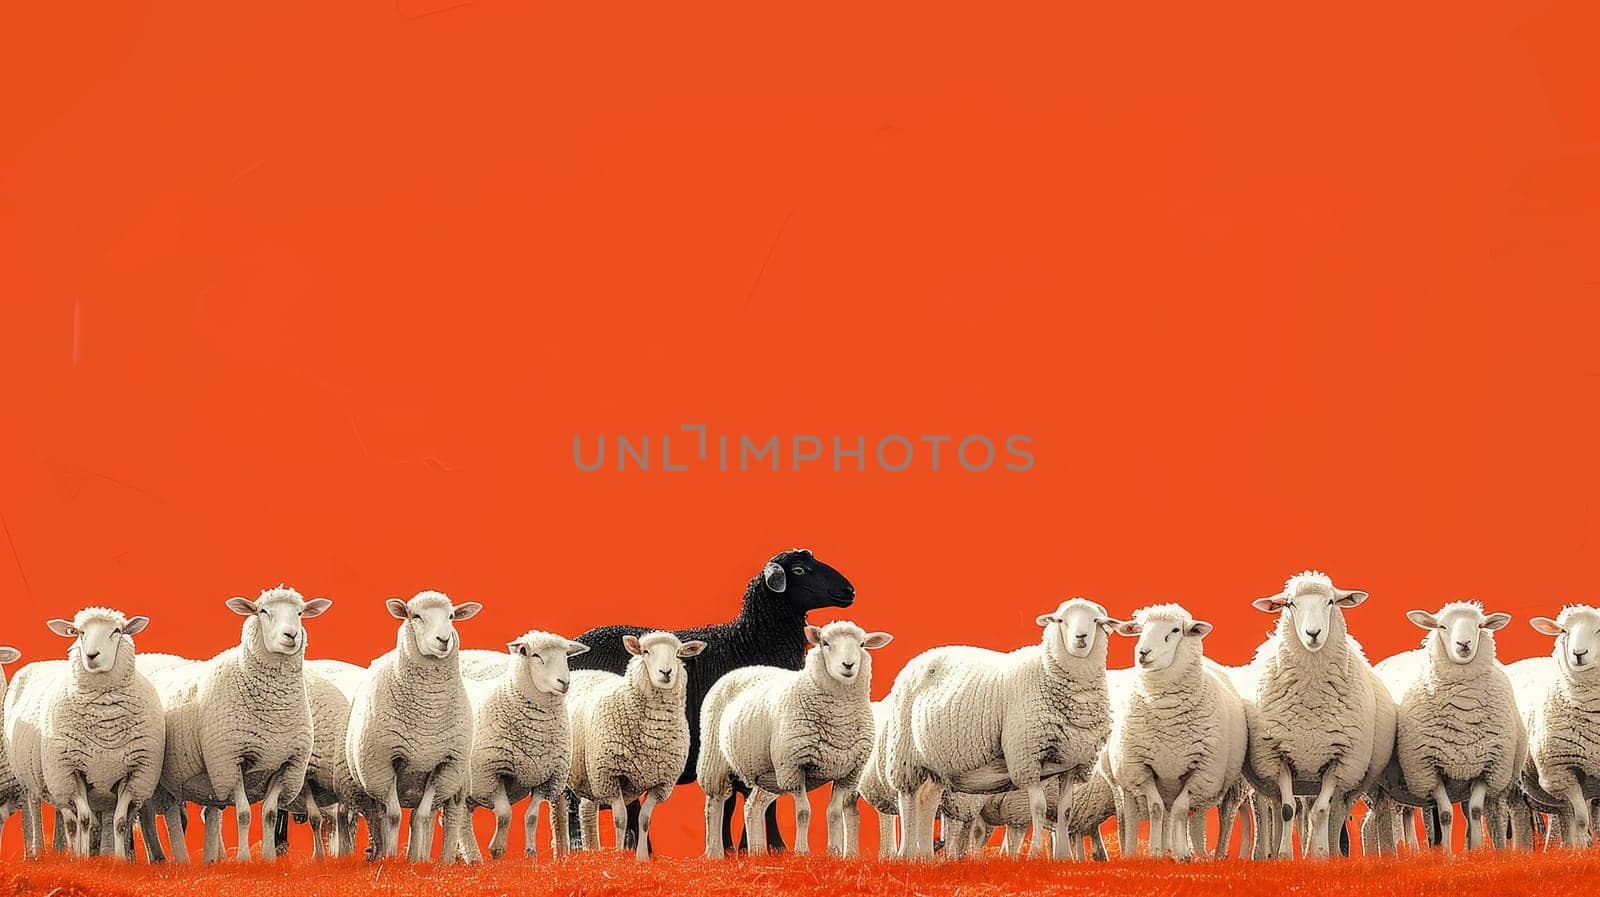 Contrasting black sheep in a group of white sheep, symbolizing uniqueness and individuality in orange background..